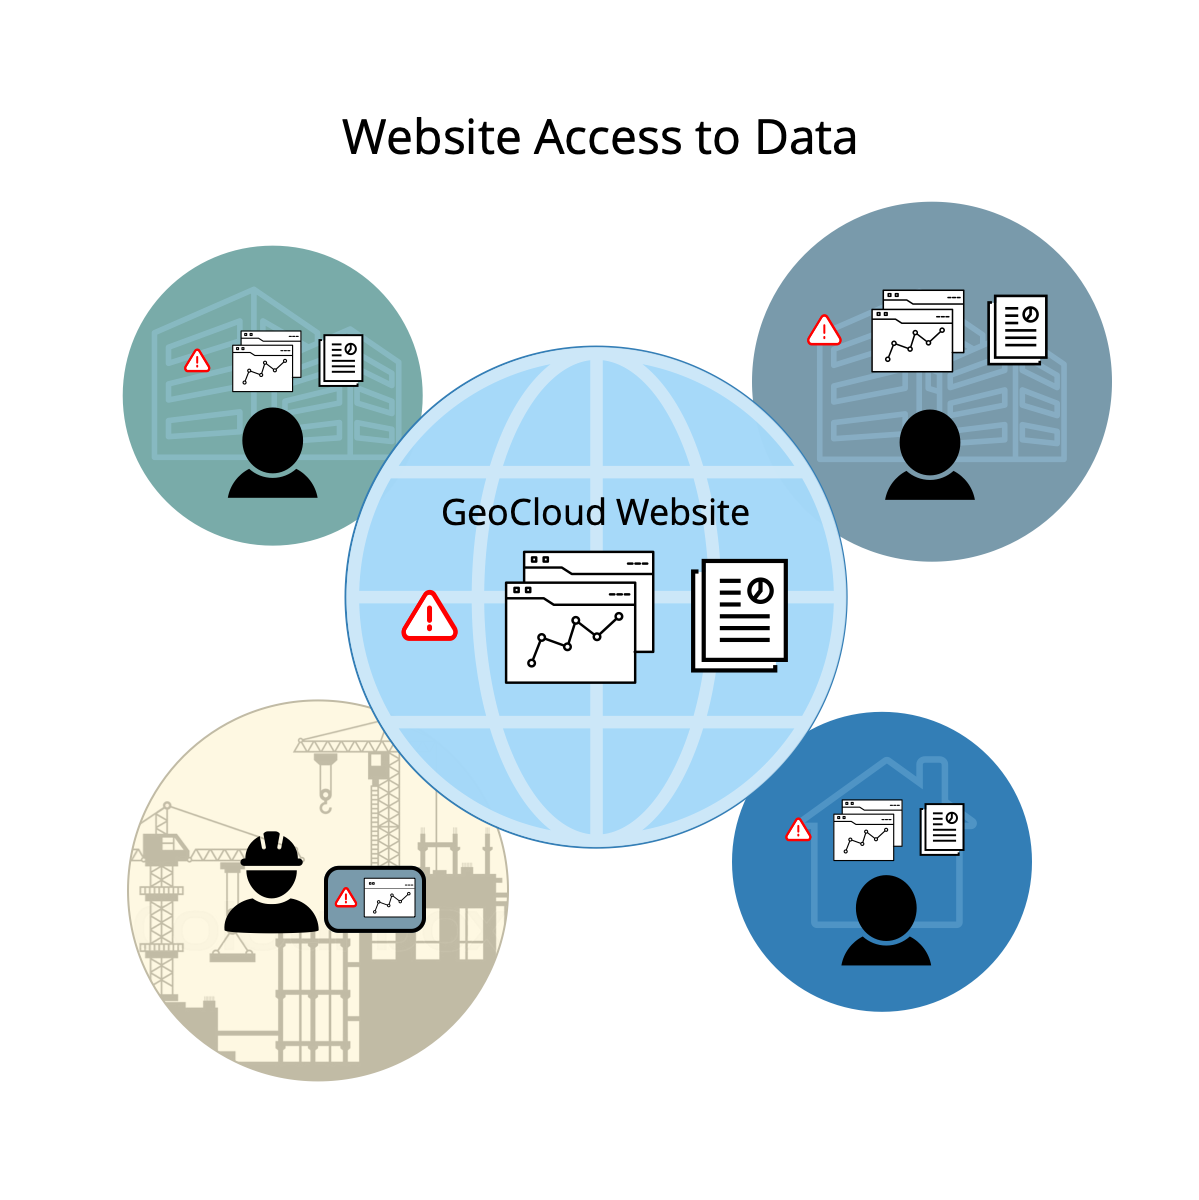 Web Access to Data